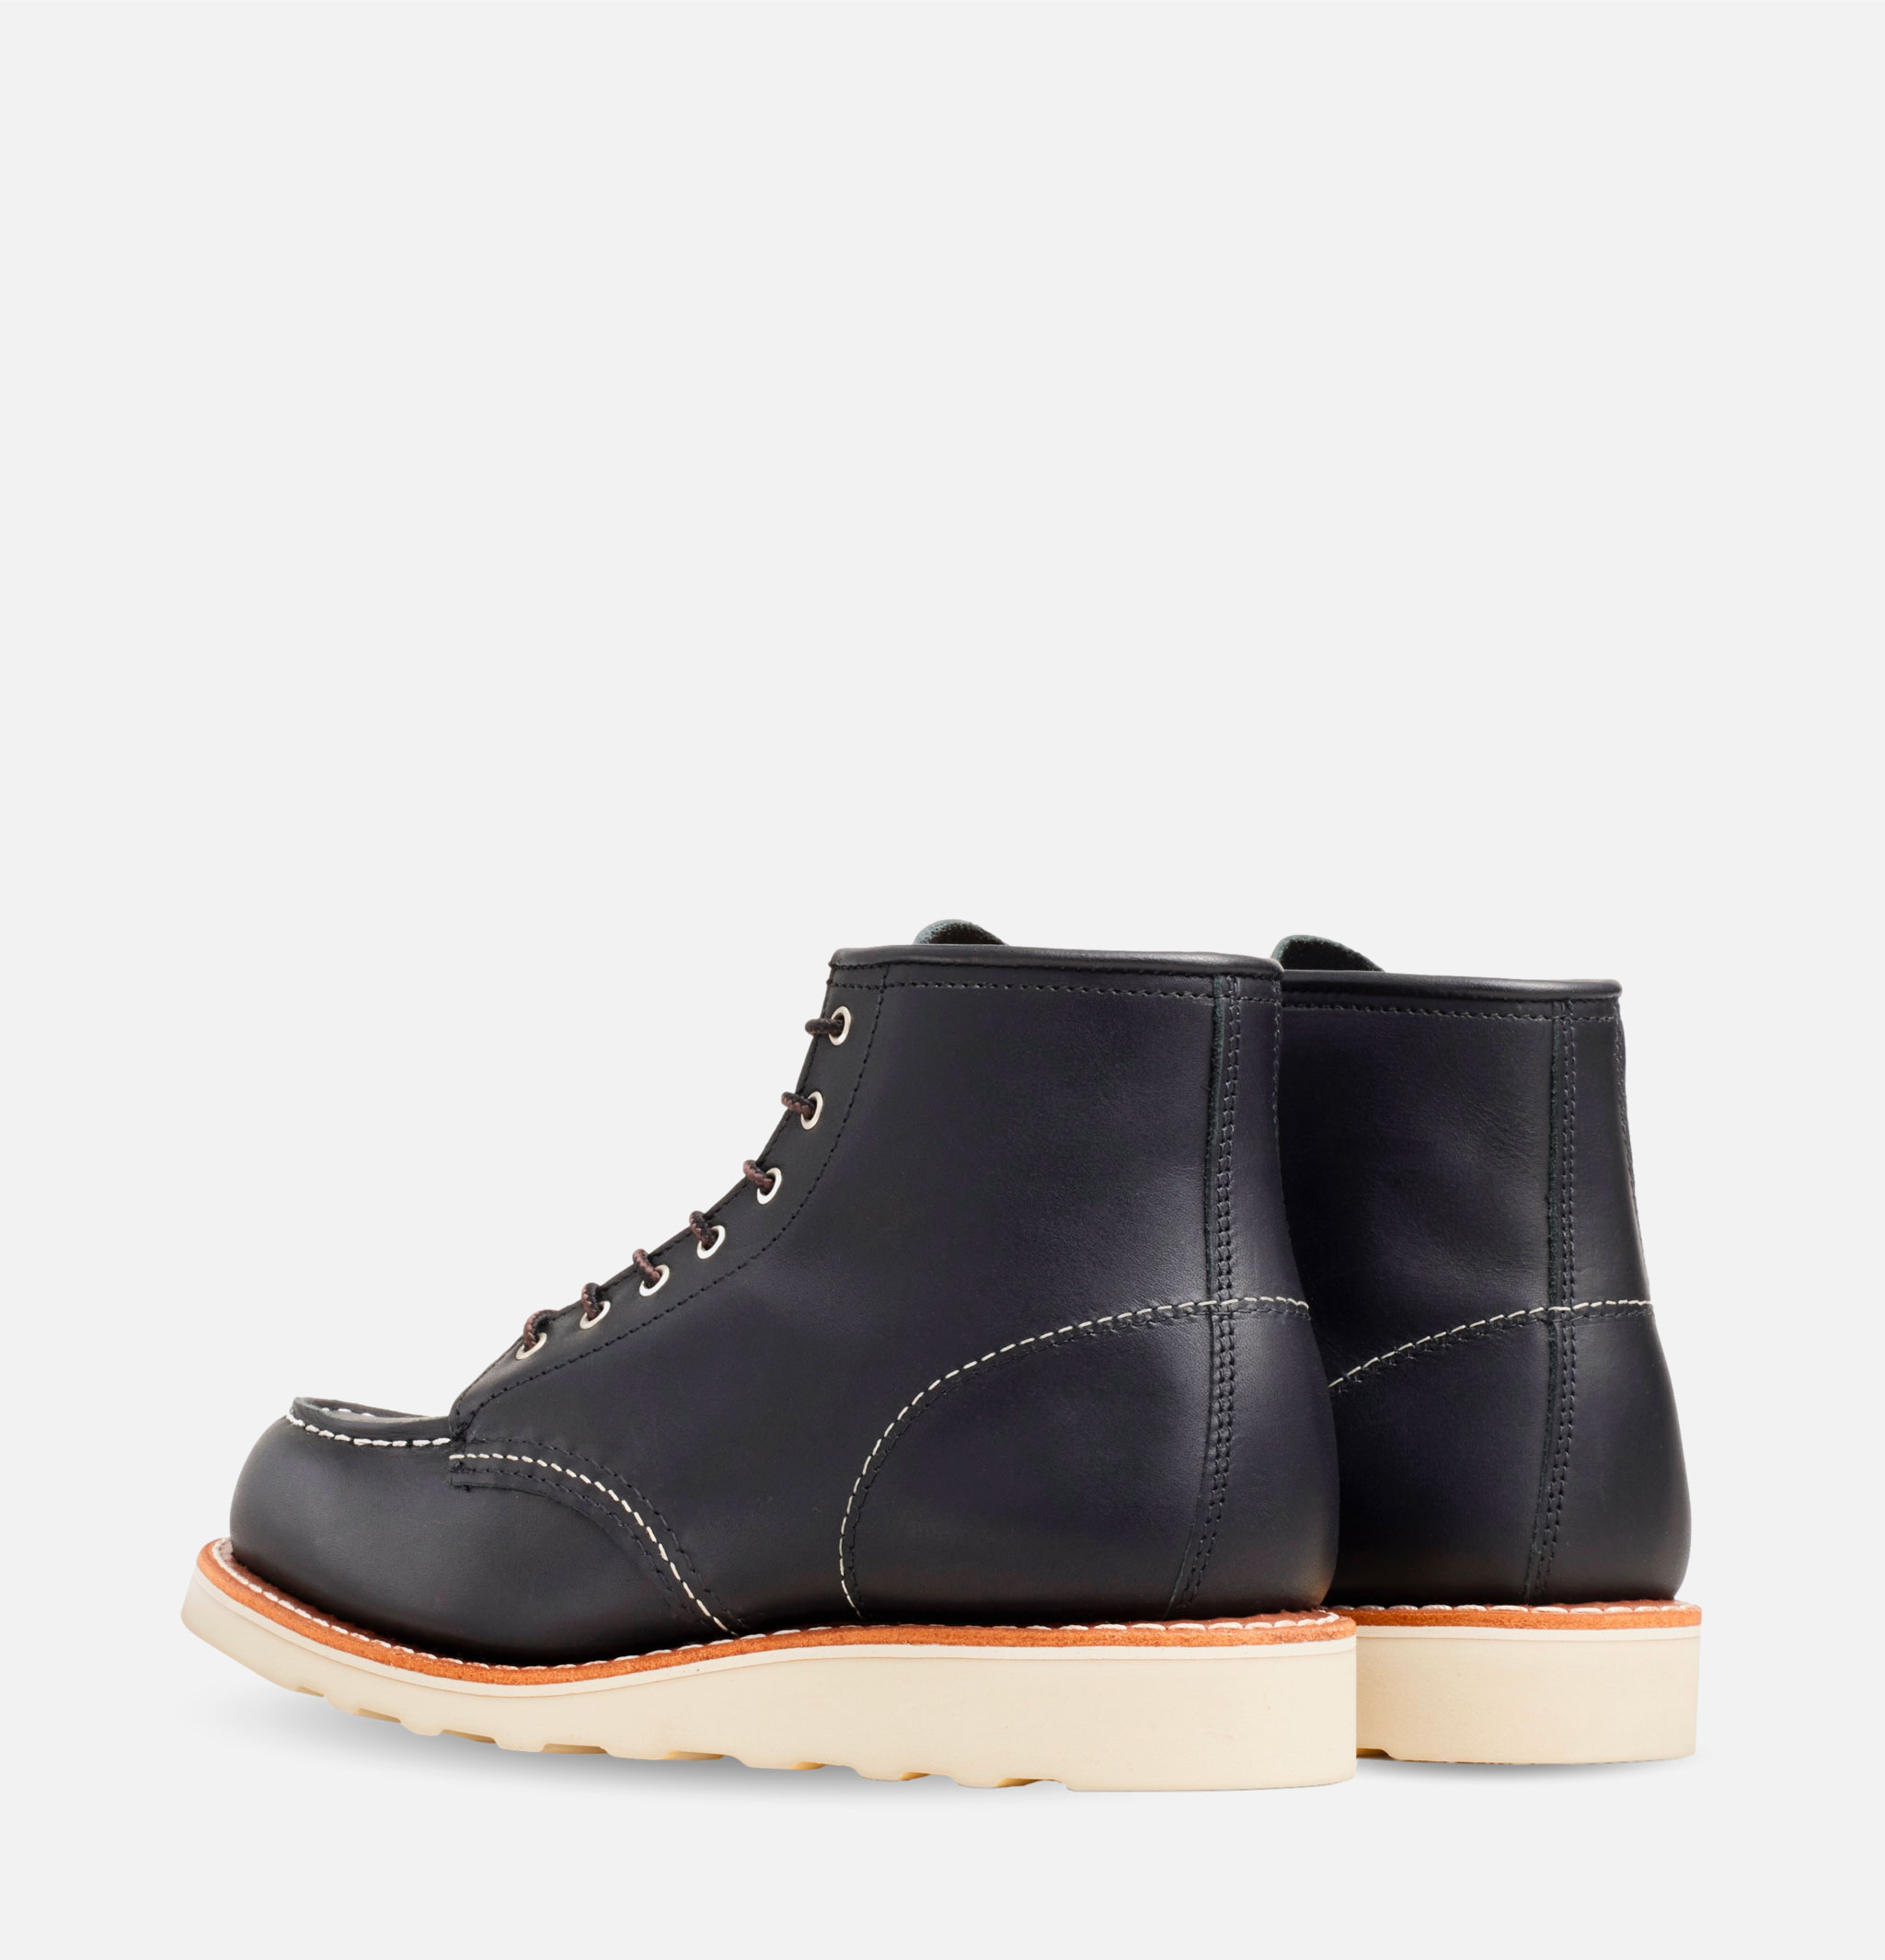 Red Wing Shoes Woman - 3373 - Moc Toe Black